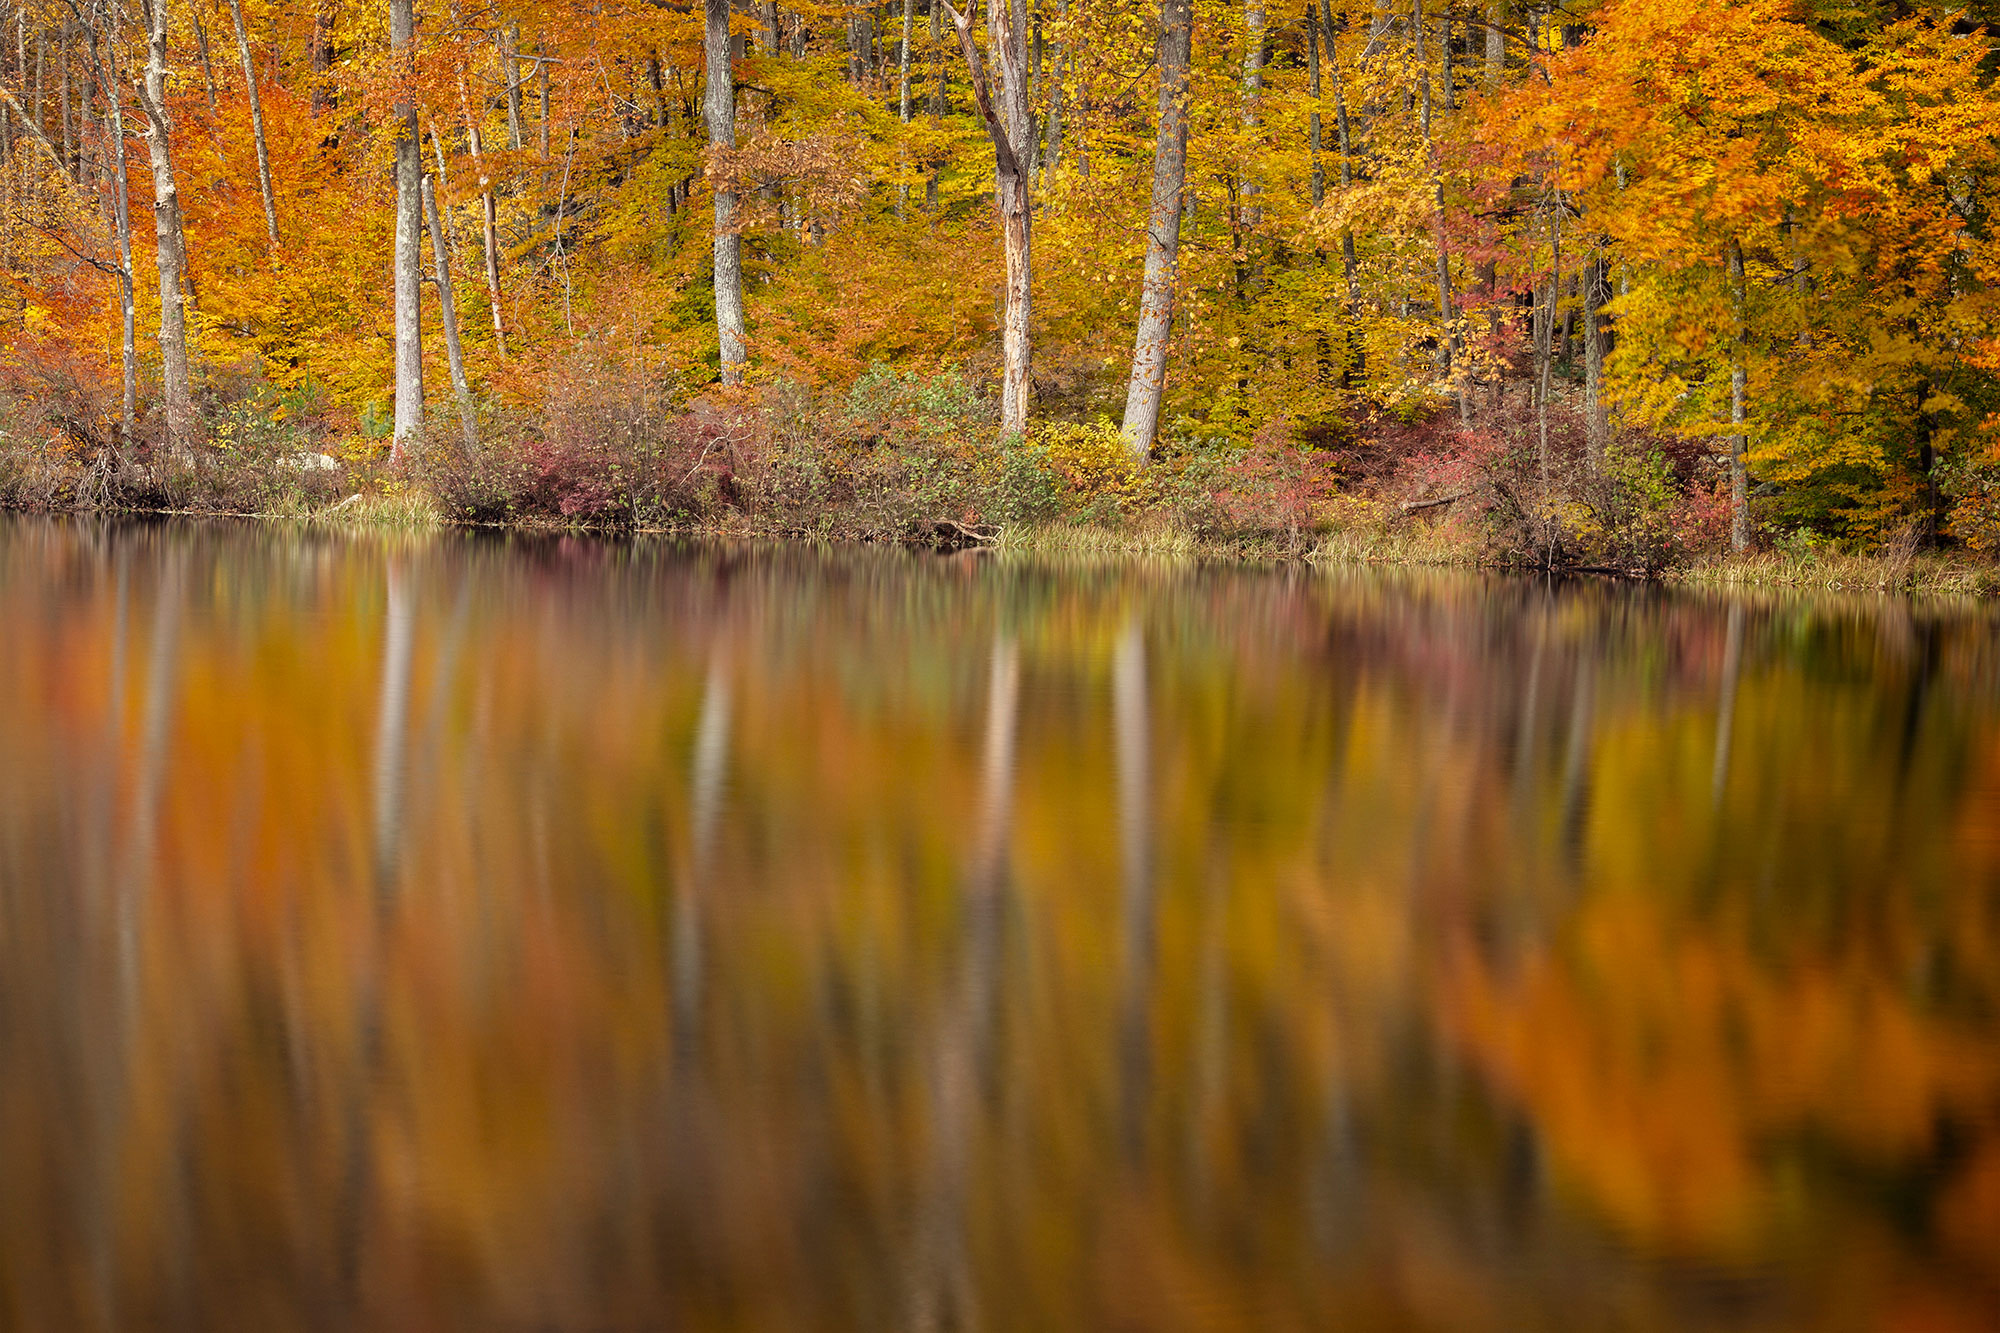 Fall reflections on Lake Ashroe in Stokes State Forest, NJ. - Harmony